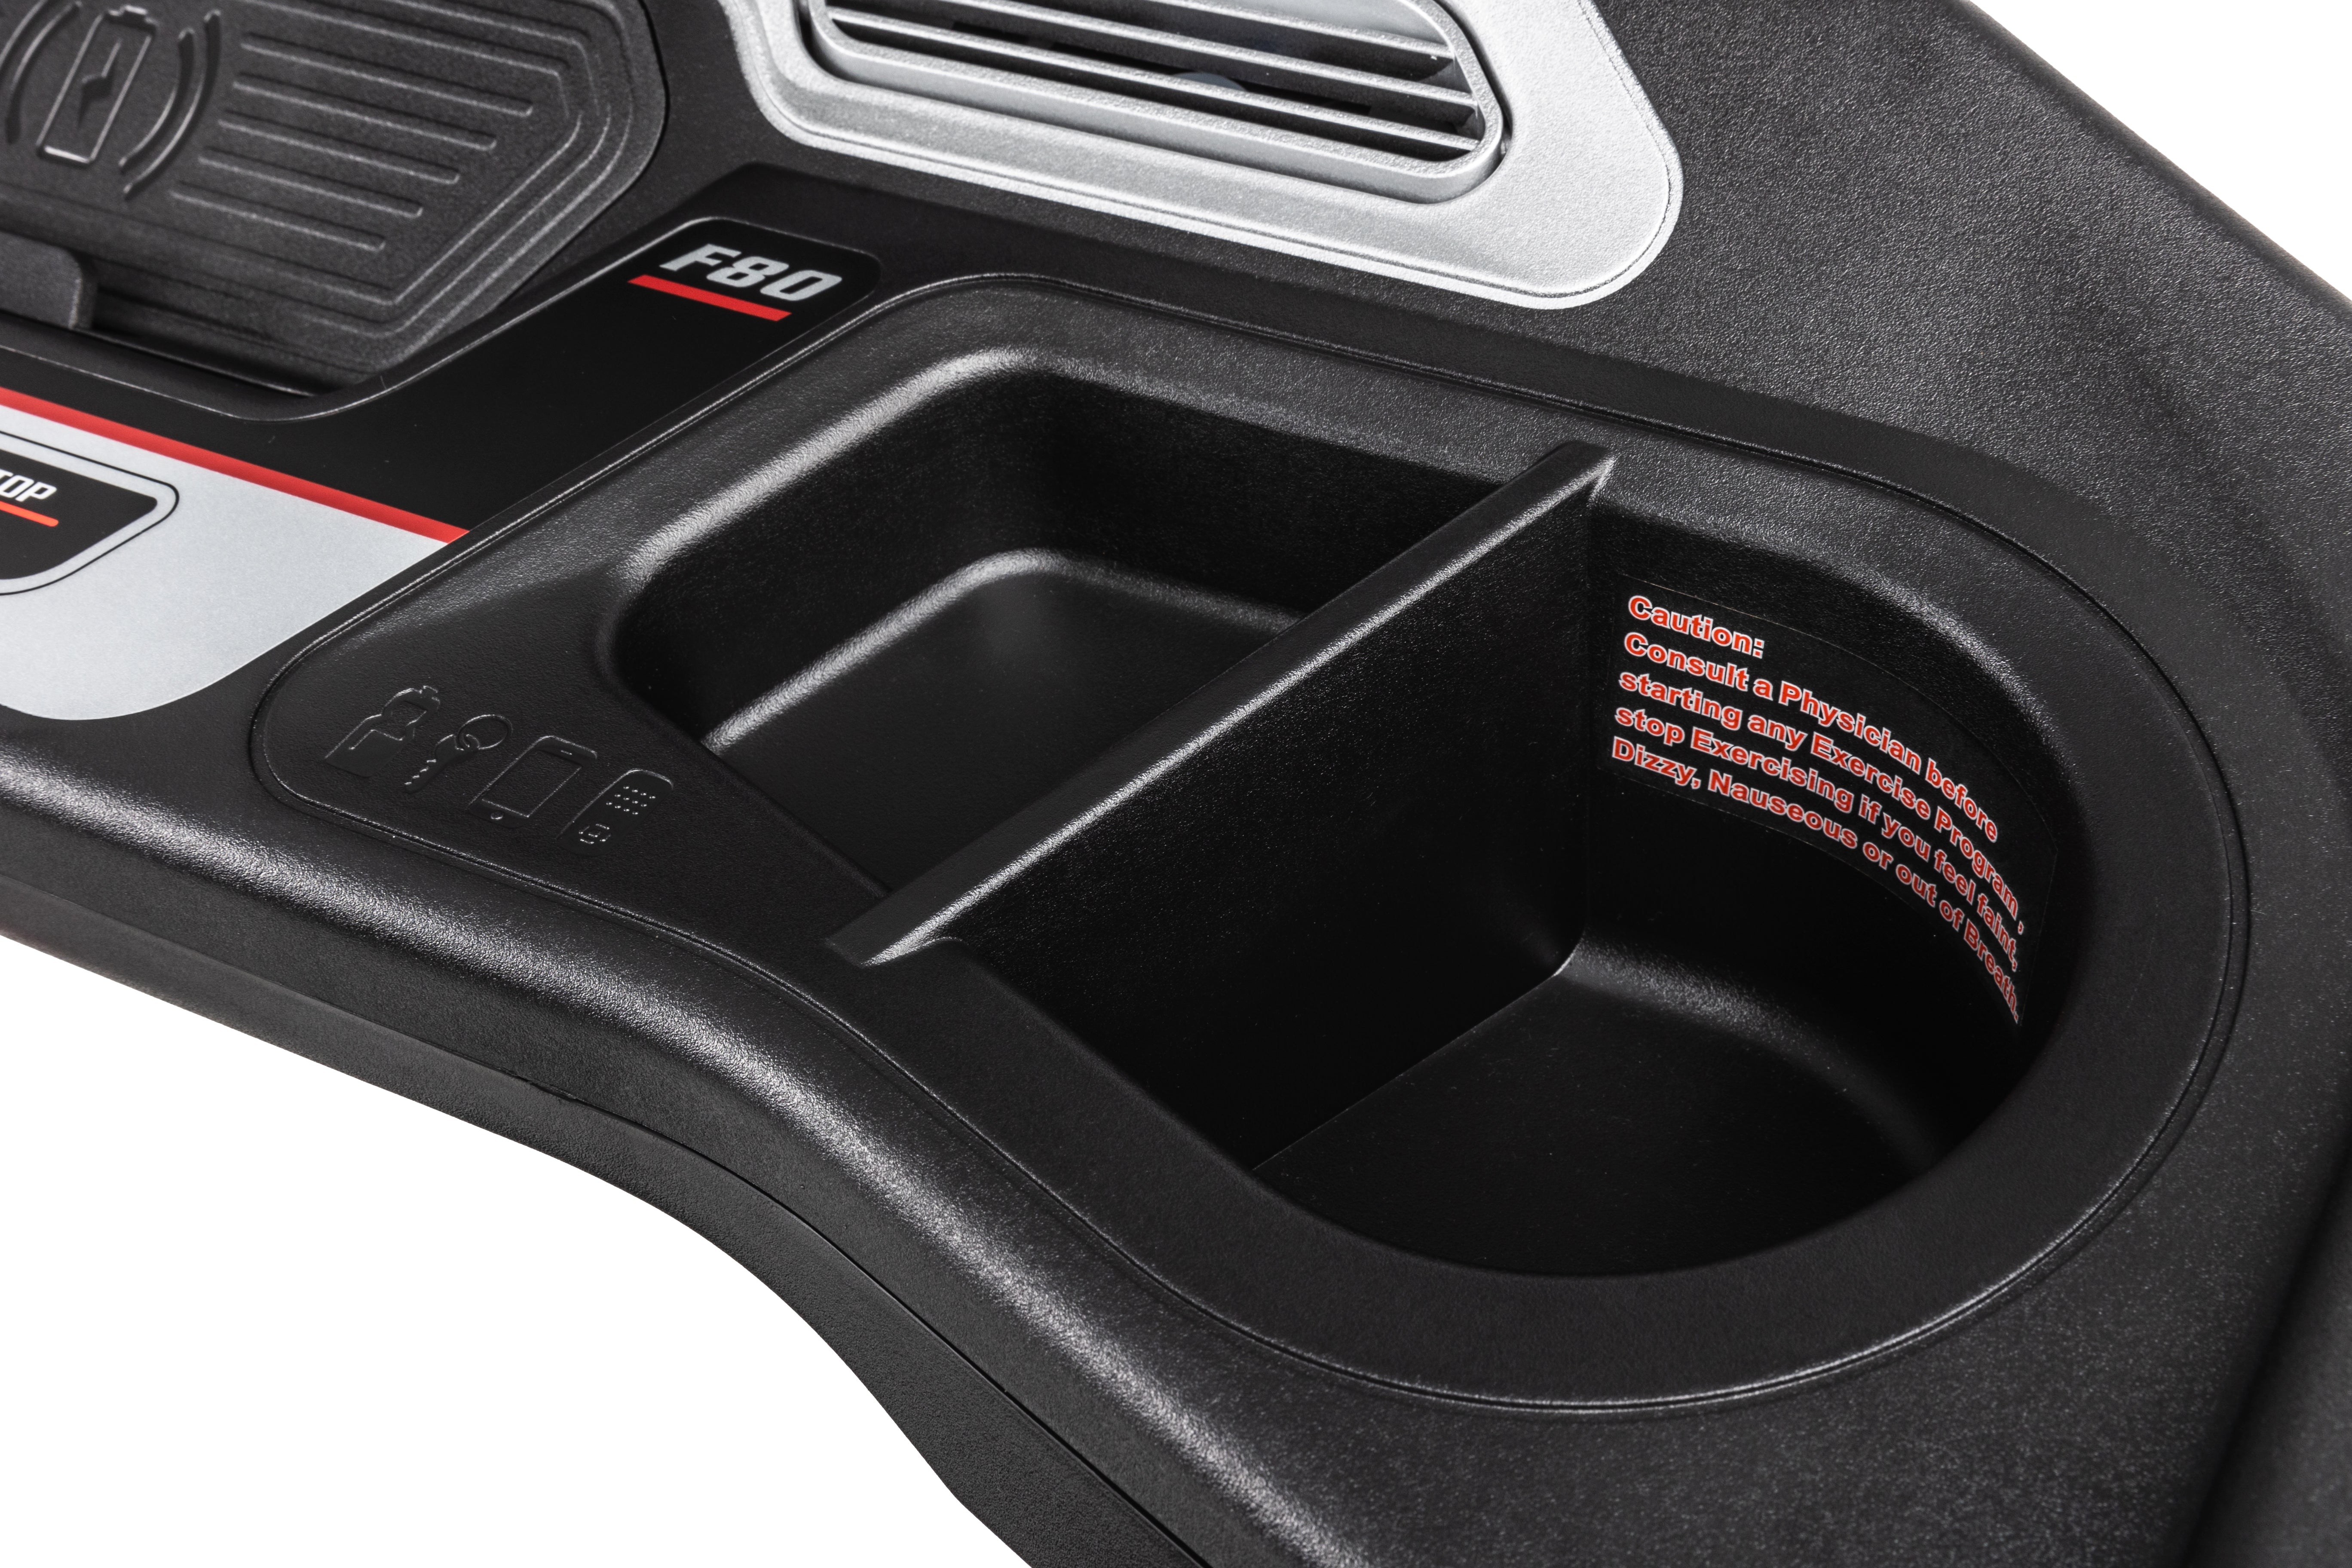 Detail of the Sole F80 treadmill's console, showcasing the labeled 'F80' logo, a recessed storage compartment, and printed safety instructions on the inner surface.